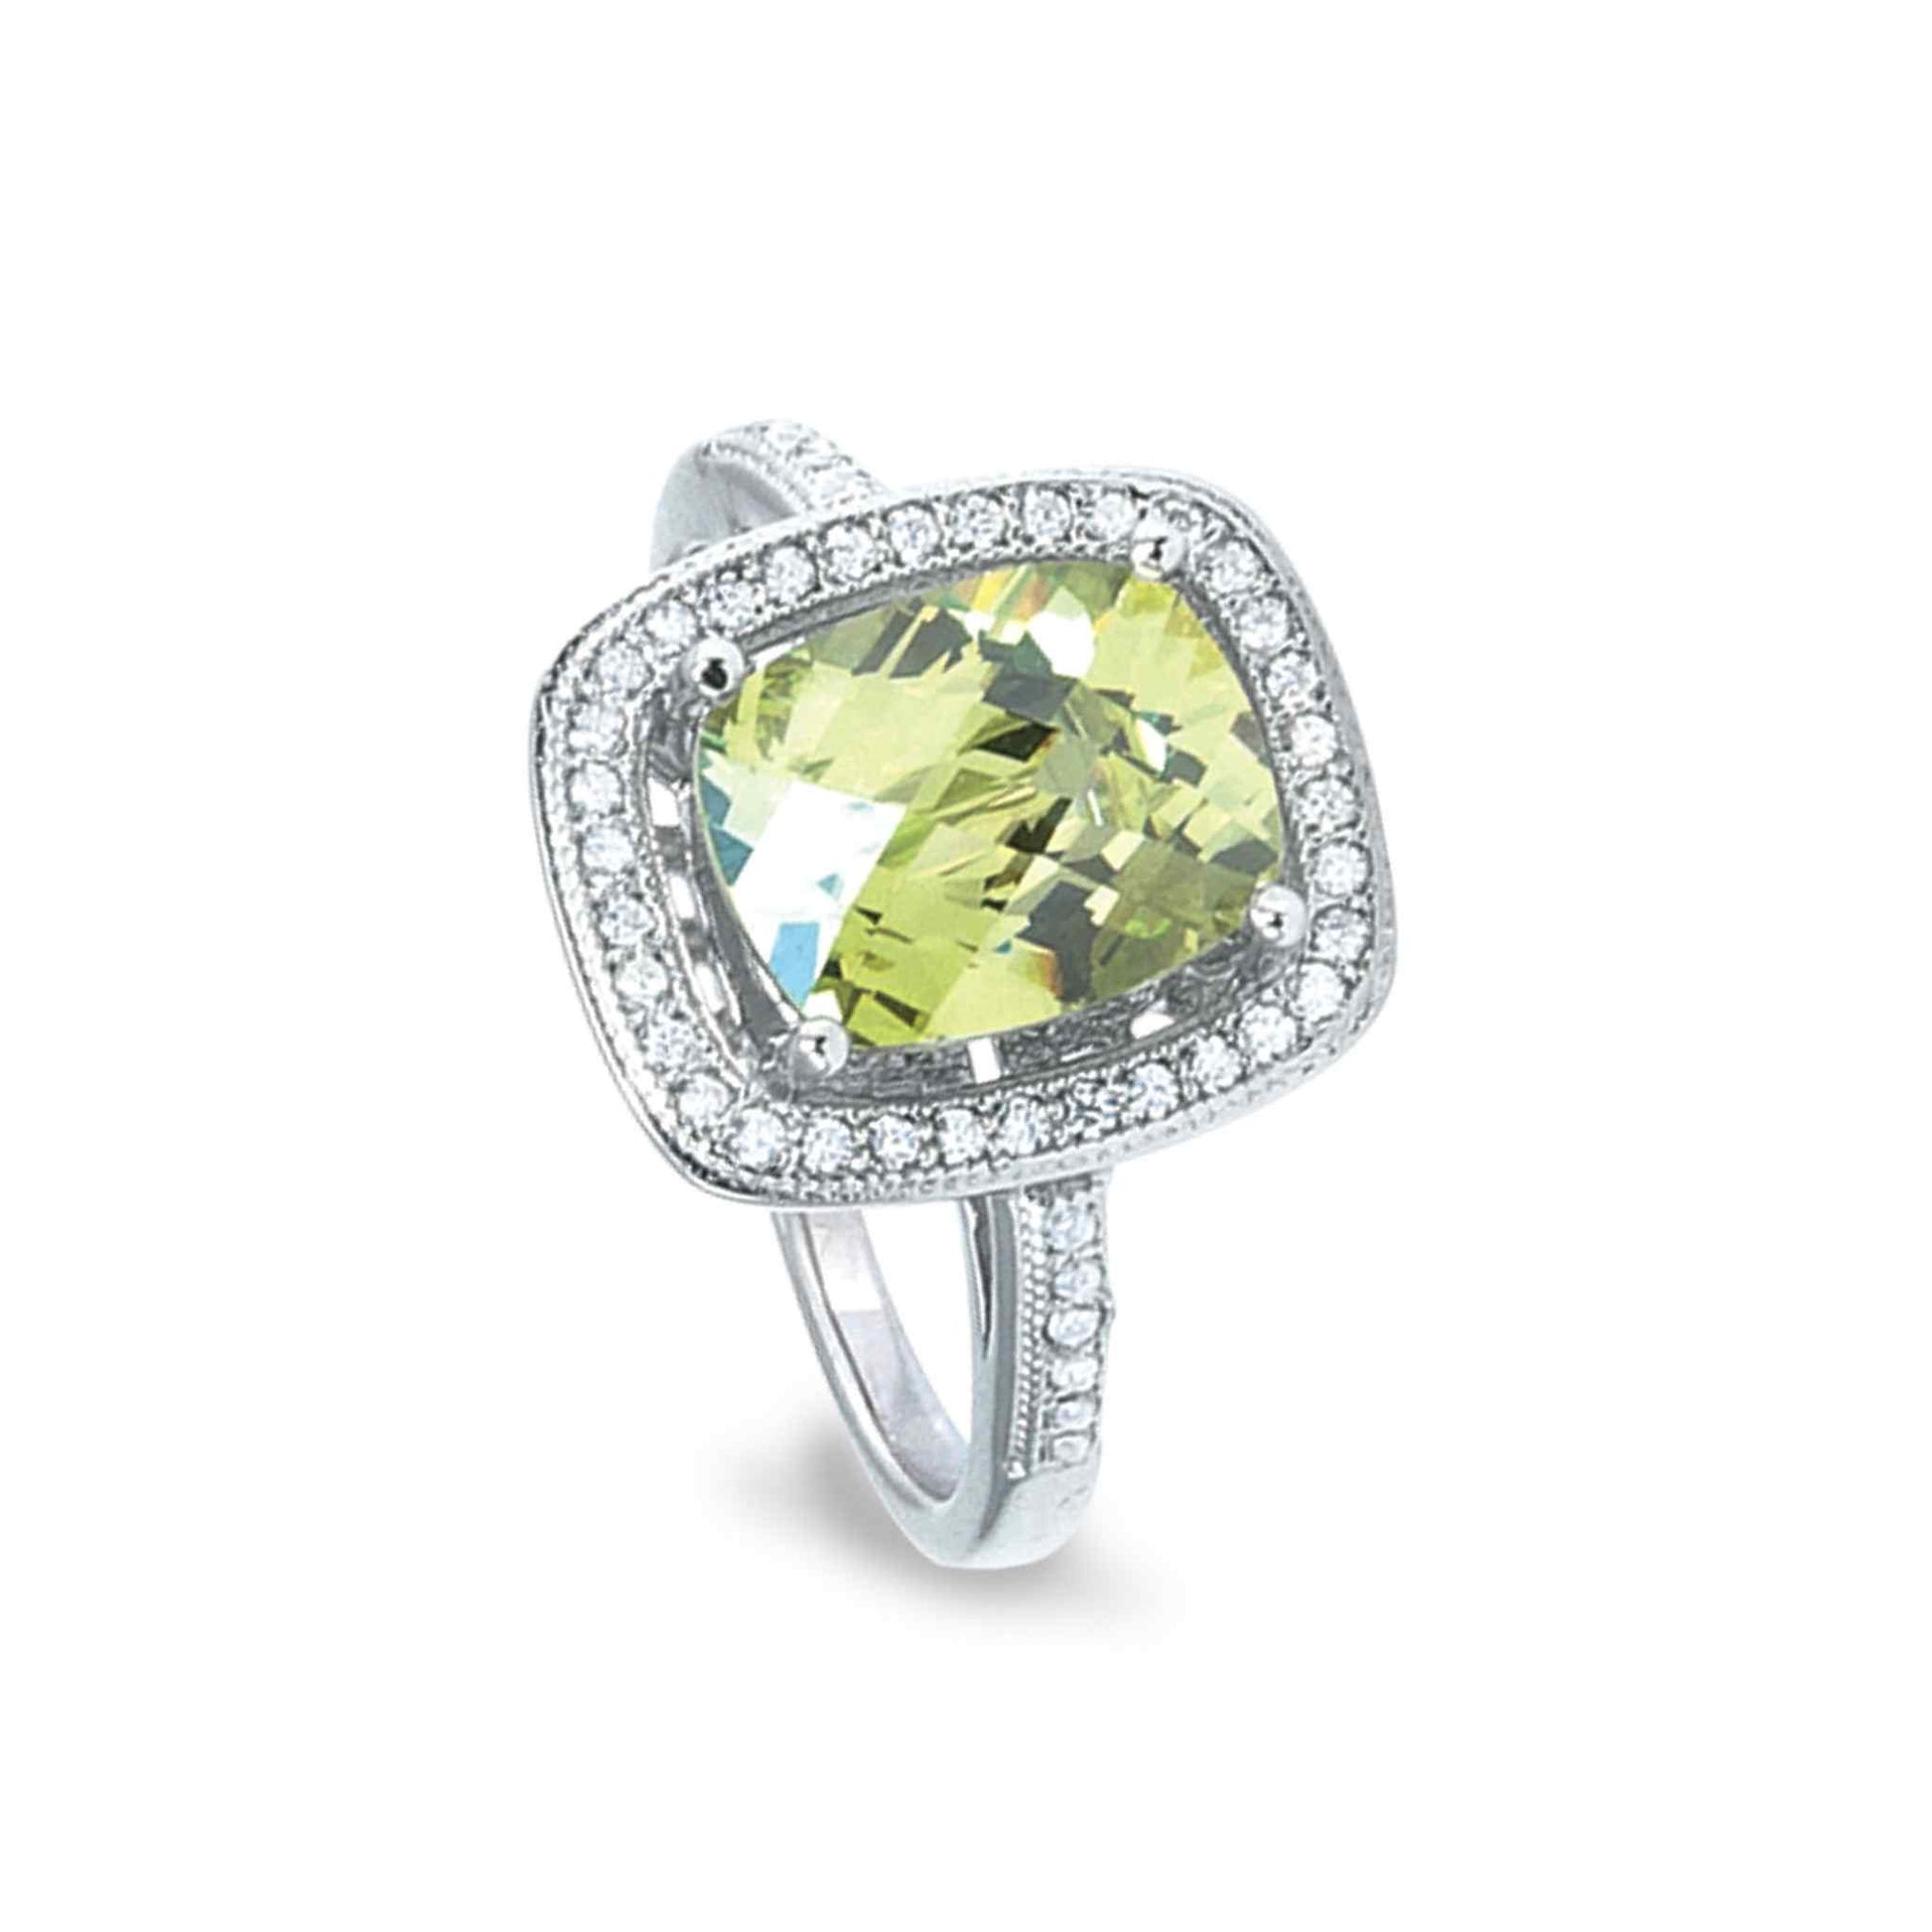 A ring with simulated peridot and simulated diamonds displayed on a neutral white background.